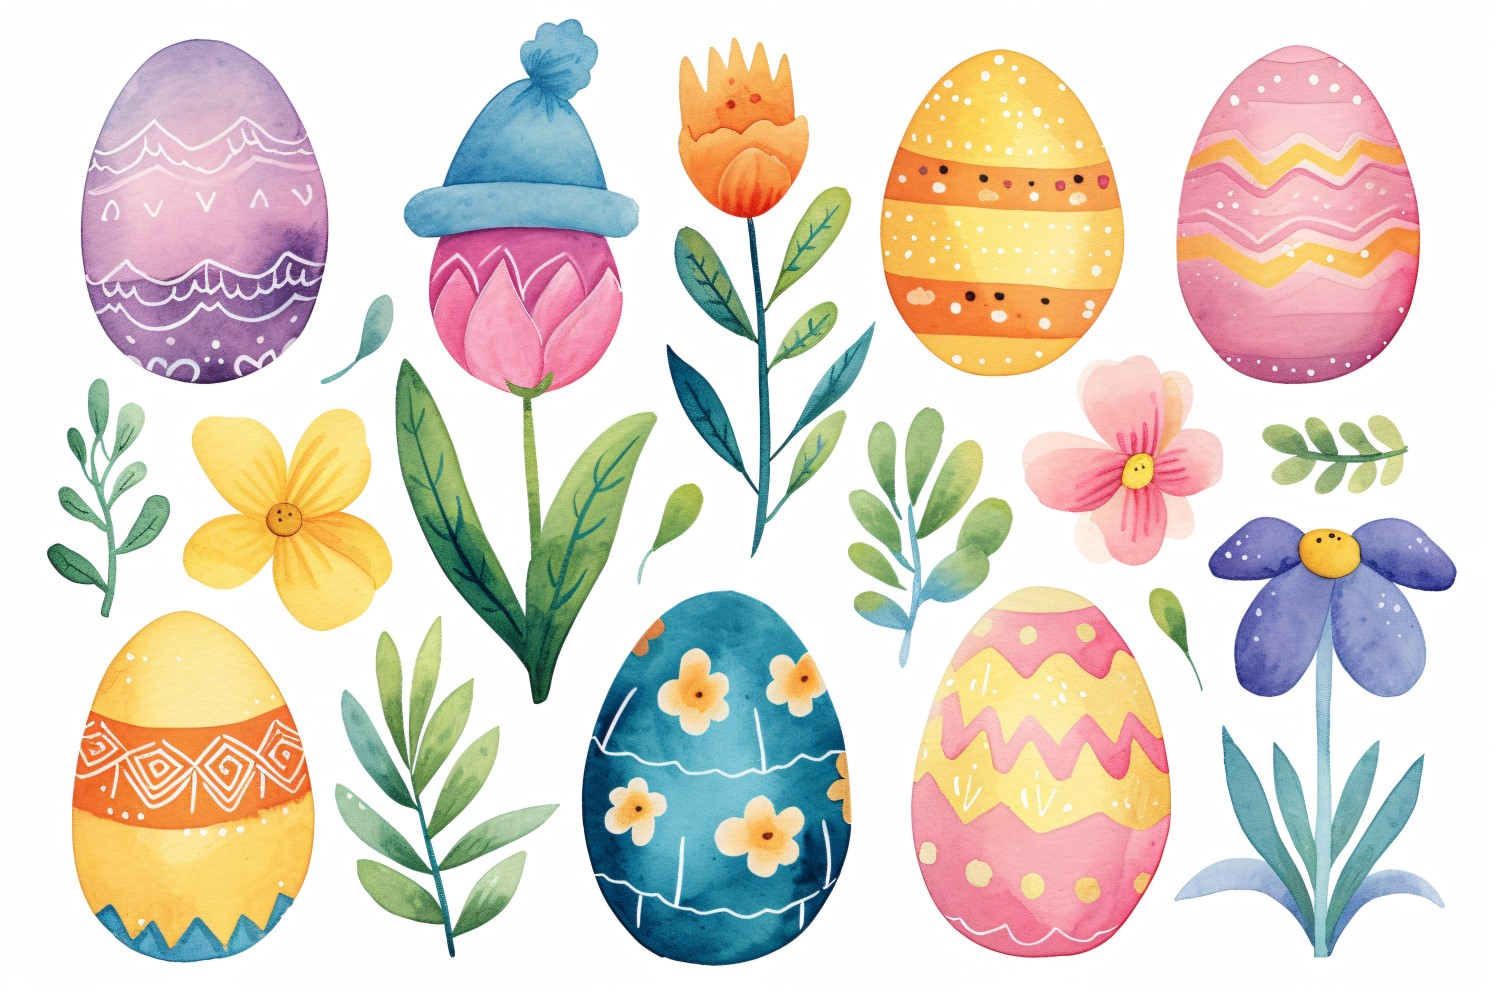 Colourful Watercolour Decorative Easter Egg & Spring Flower 139